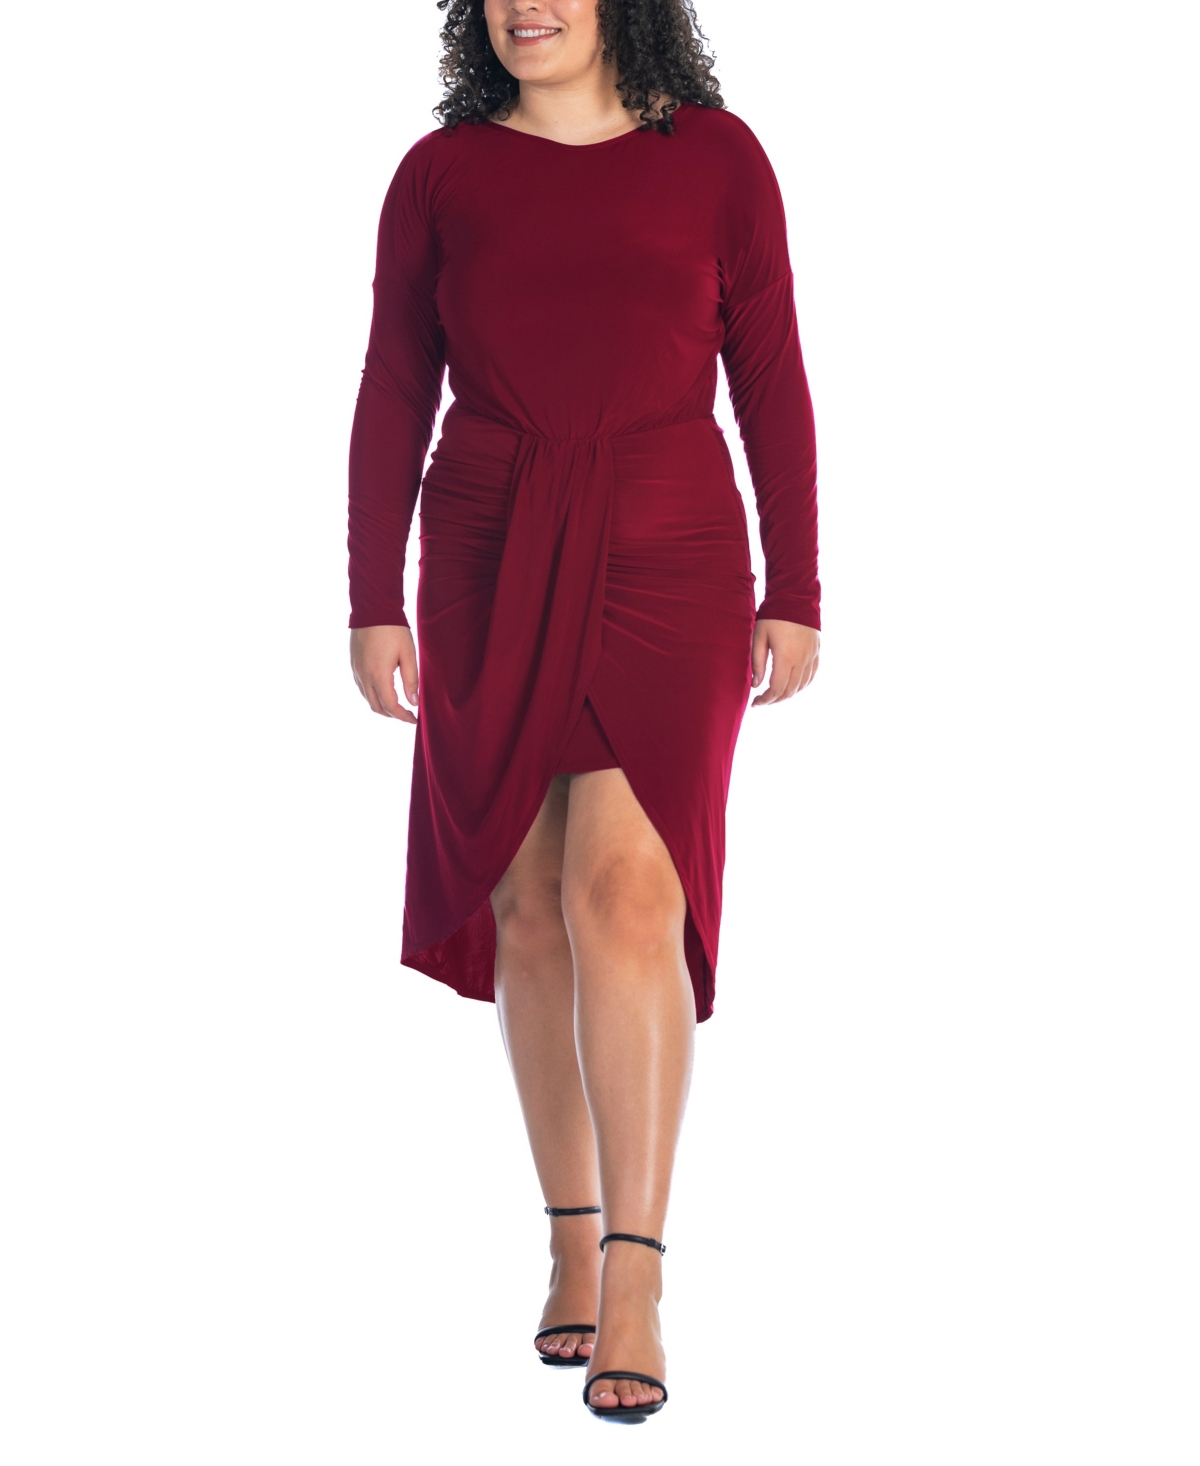 24seven Comfort Apparel Plus Size Long Sleeve High Low Dress In Burgundy